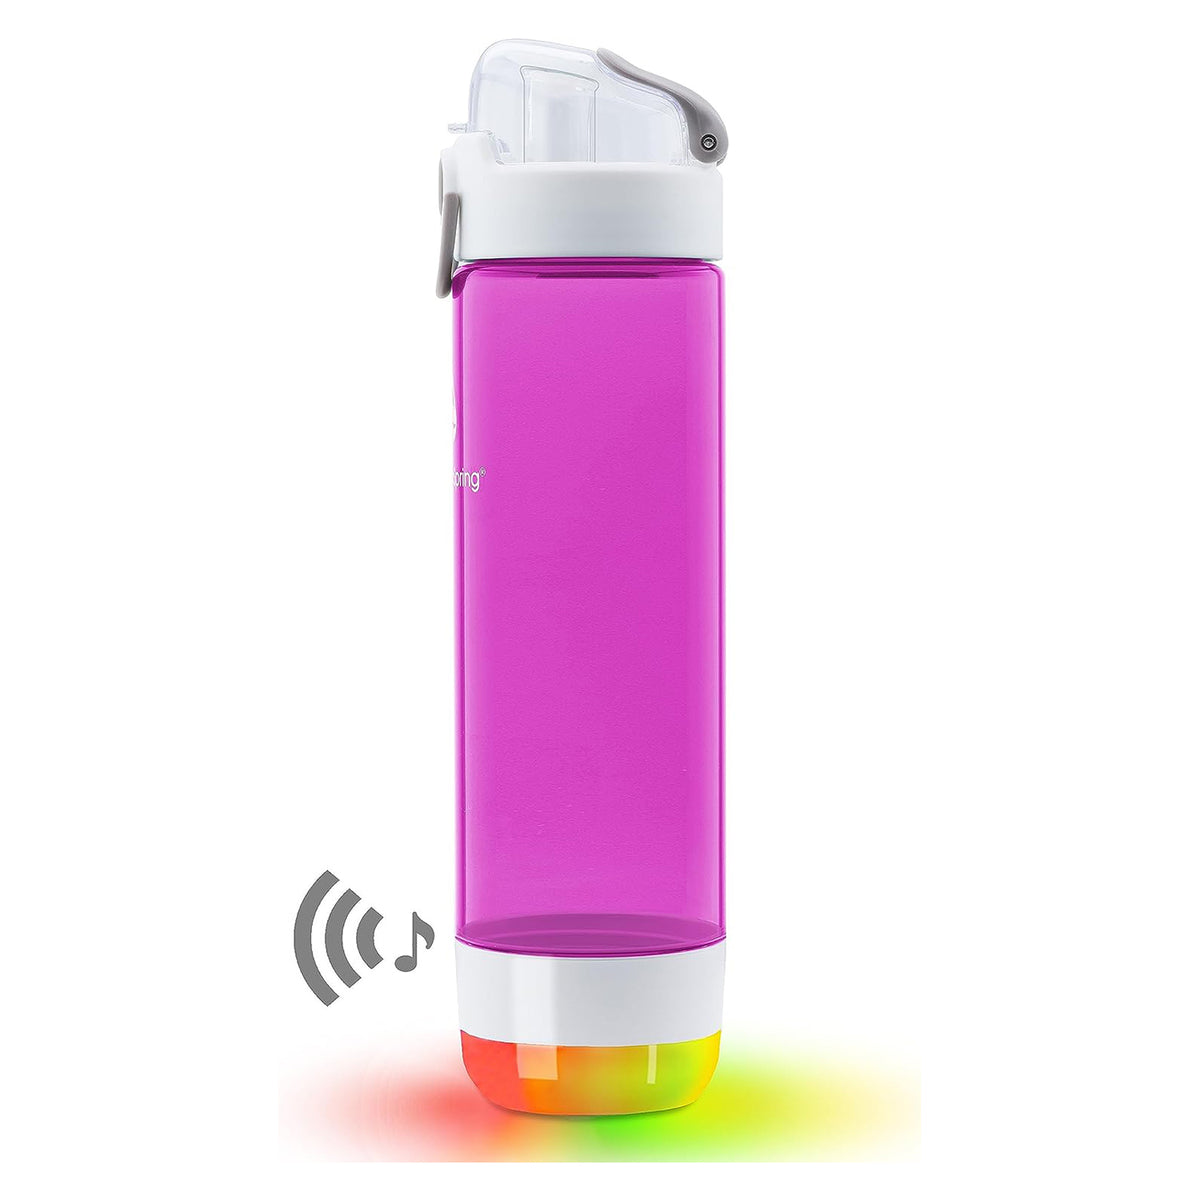 HandySpring - 26 oz Smart Water Bottle with Reminder to Drink Water - Lights & Sound Alert (Switchable) Hydrate Water Bottle, Water Tracker with Spout, Smart Hydration Light H(S)-01PE